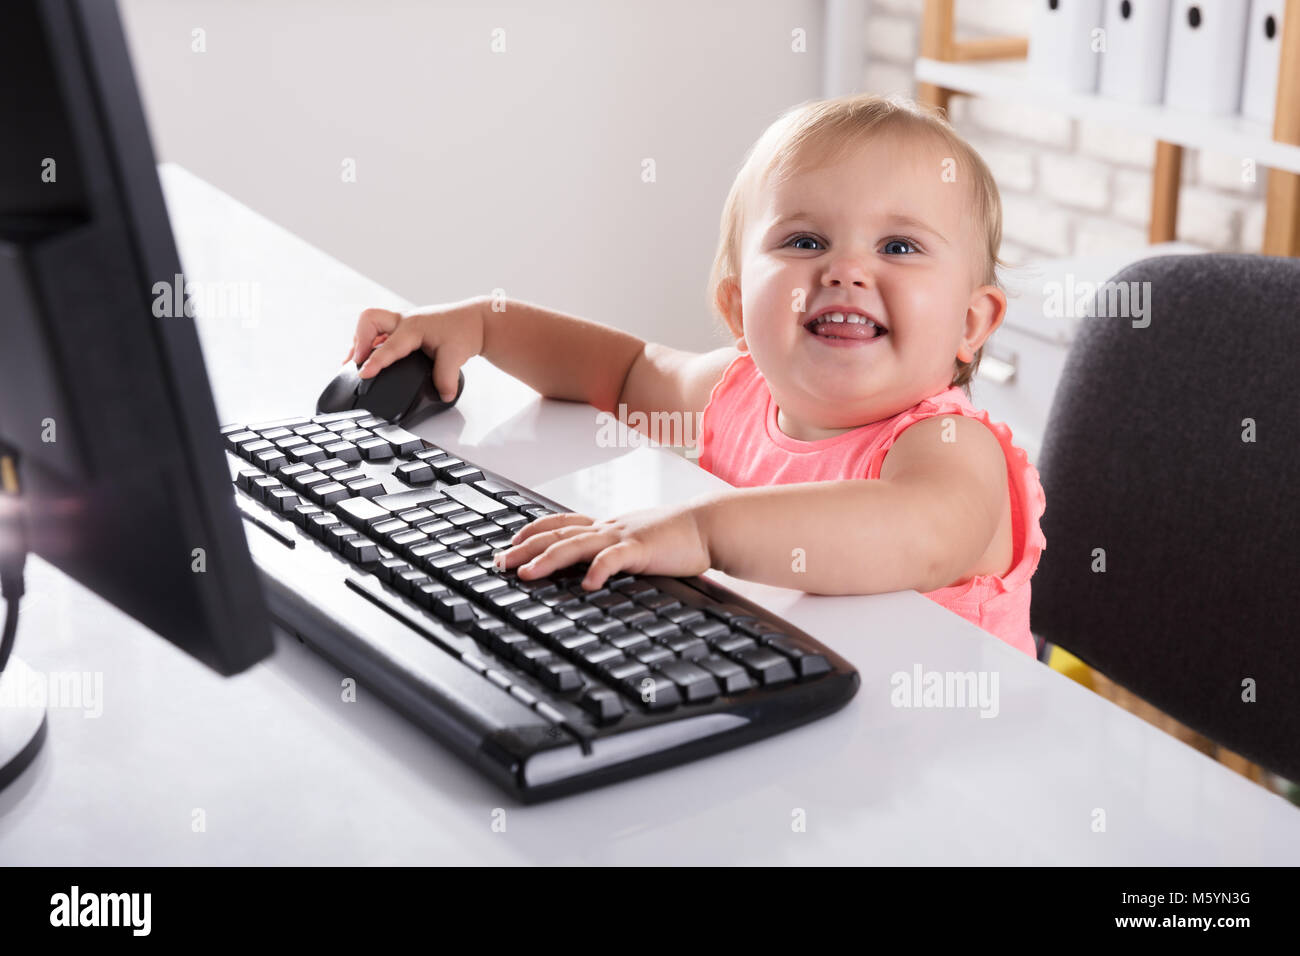 Close-up of Cute Smiling Baby Girl Using Computer Banque D'Images